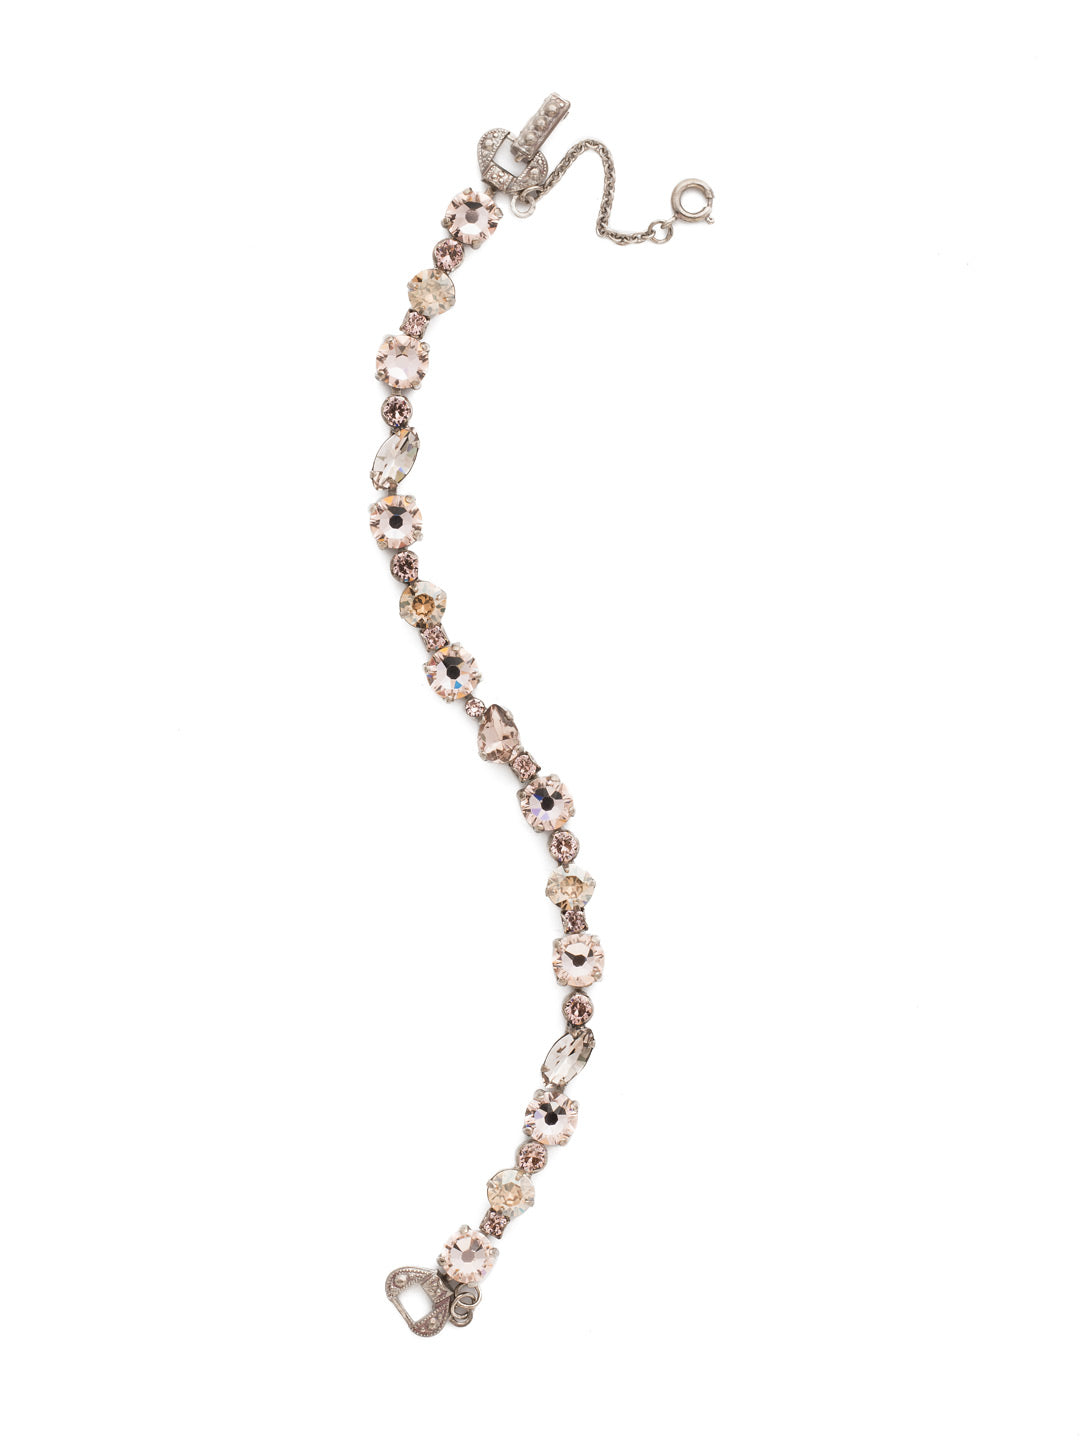 Always and Forever Bracelet - BDP11ASSBL - <p>Classic style abounds in this timeless line bracelet. Adds an amazing amount of sparkle alone or can be layered with others for over-the-top glamour. From Sorrelli's Satin Blush collection in our Antique Silver-tone finish.</p>